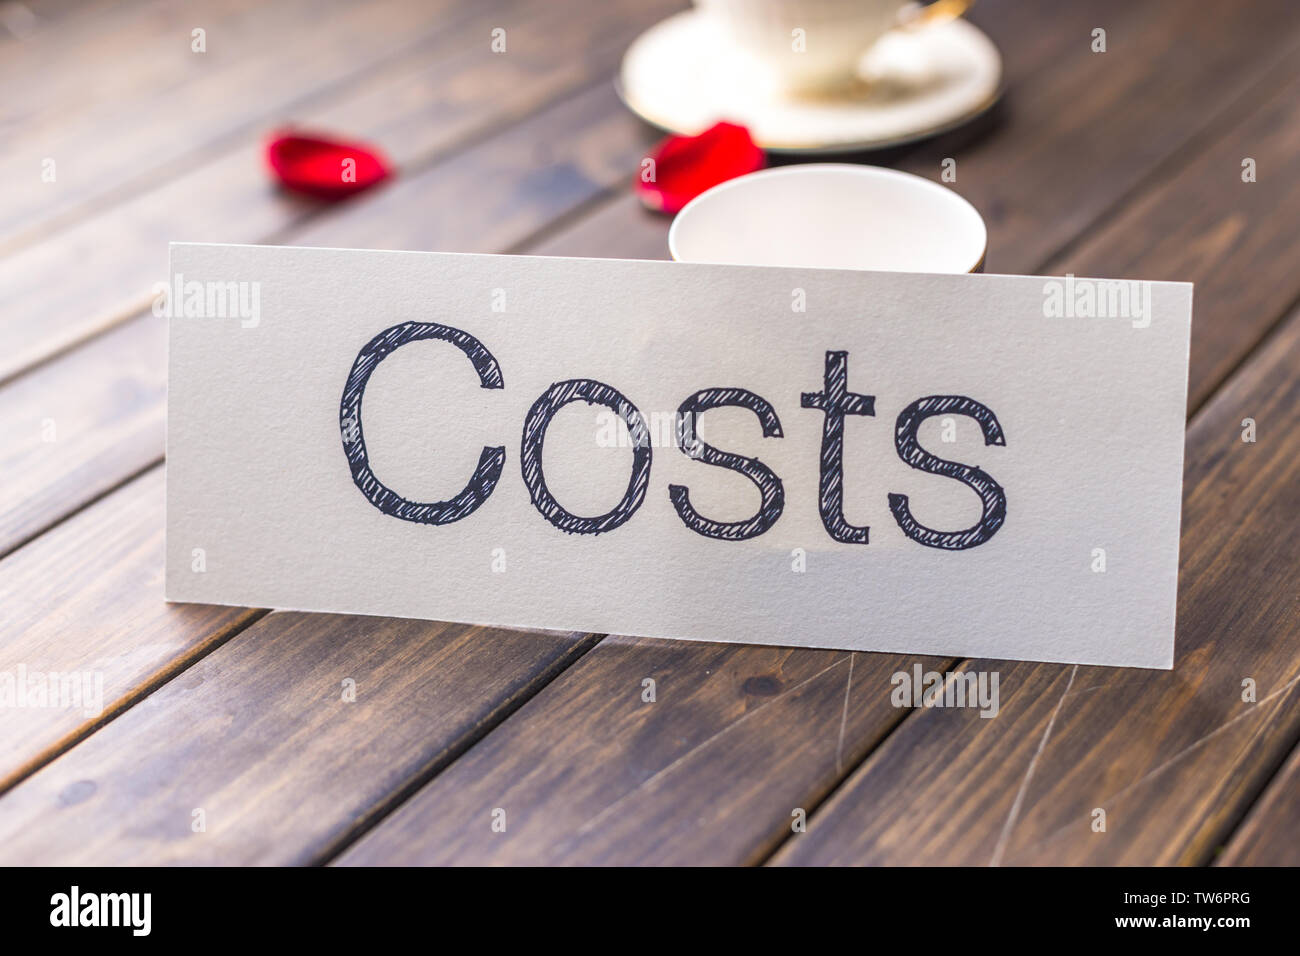 Cost on white paper in cafe Stock Photo